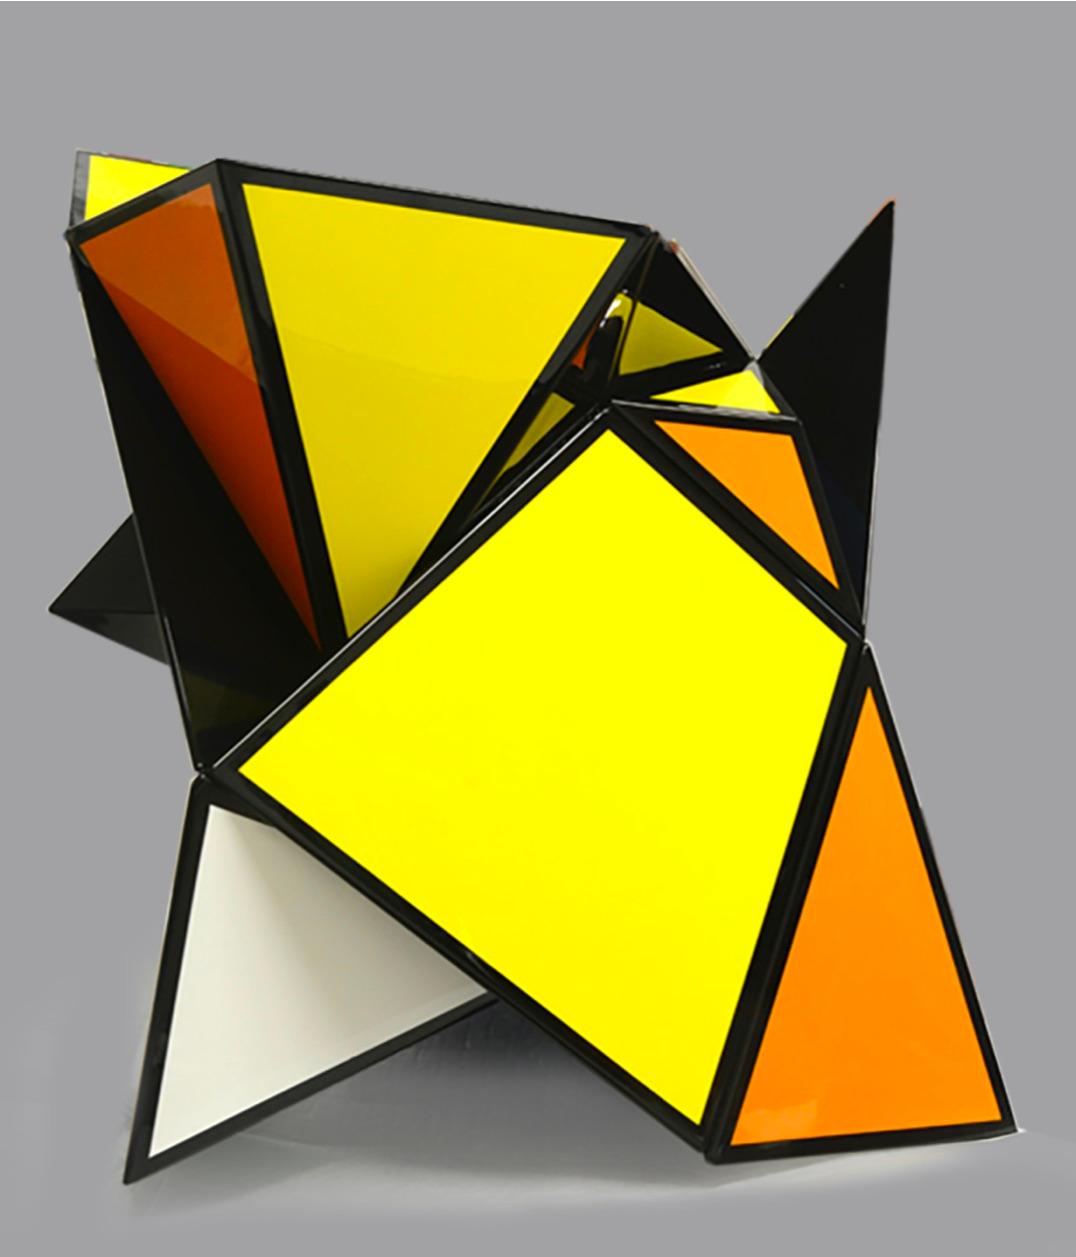 Magic Cube 3.1.2 - Sculpture by Jannis Markopoulos